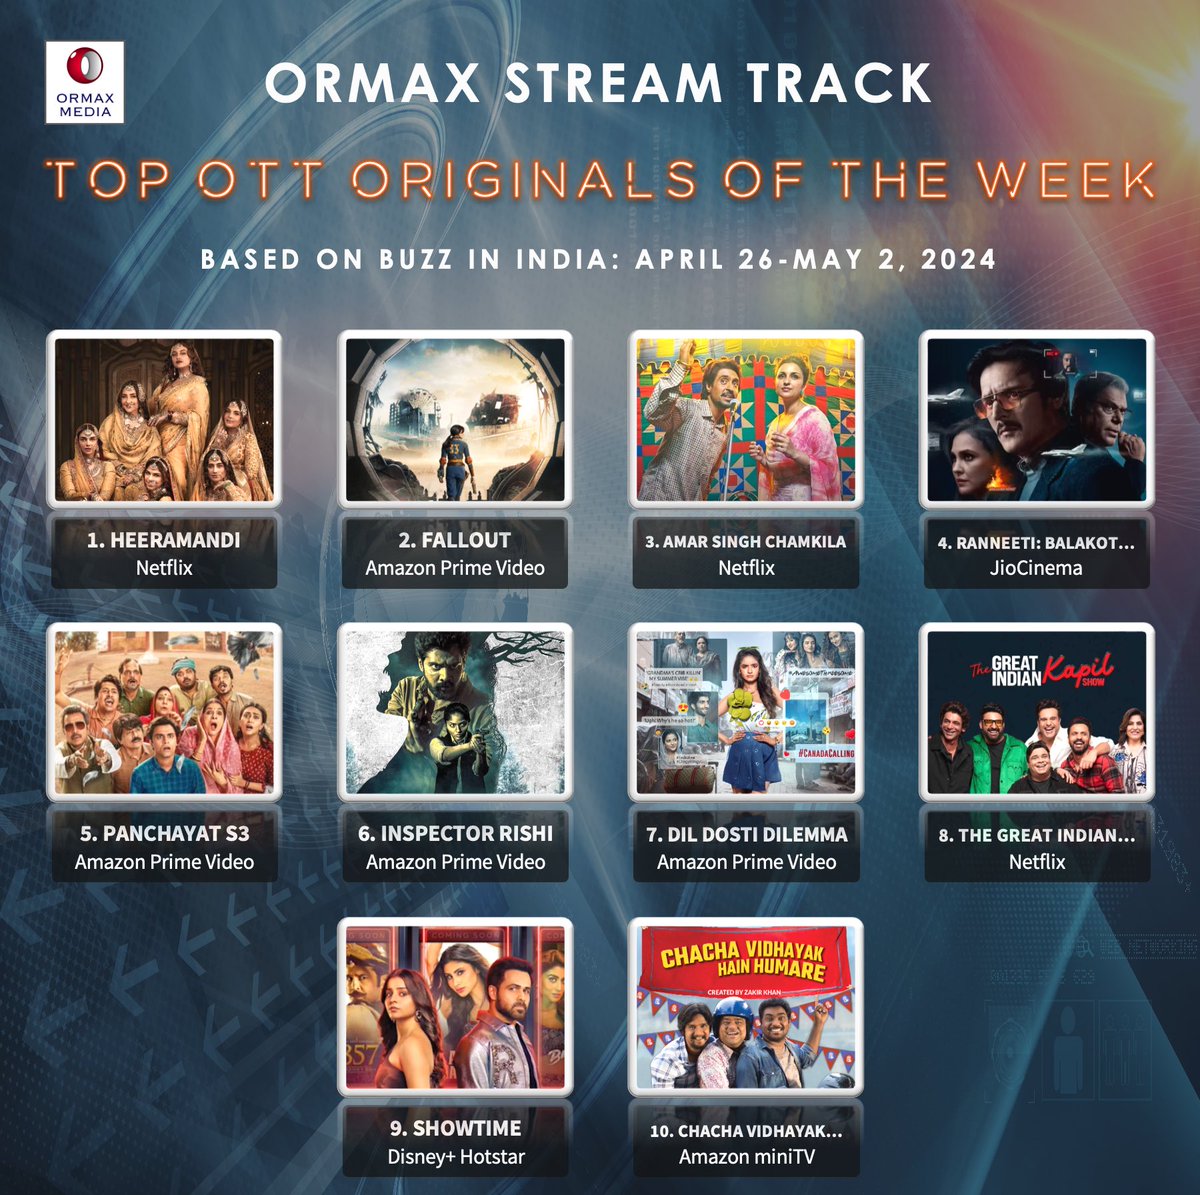 Ormax Stream Track: Top 10 OTT originals in India, including upcoming shows/ films, based on Buzz (Apr 26-May 2) #OrmaxStreamTrack #OTT